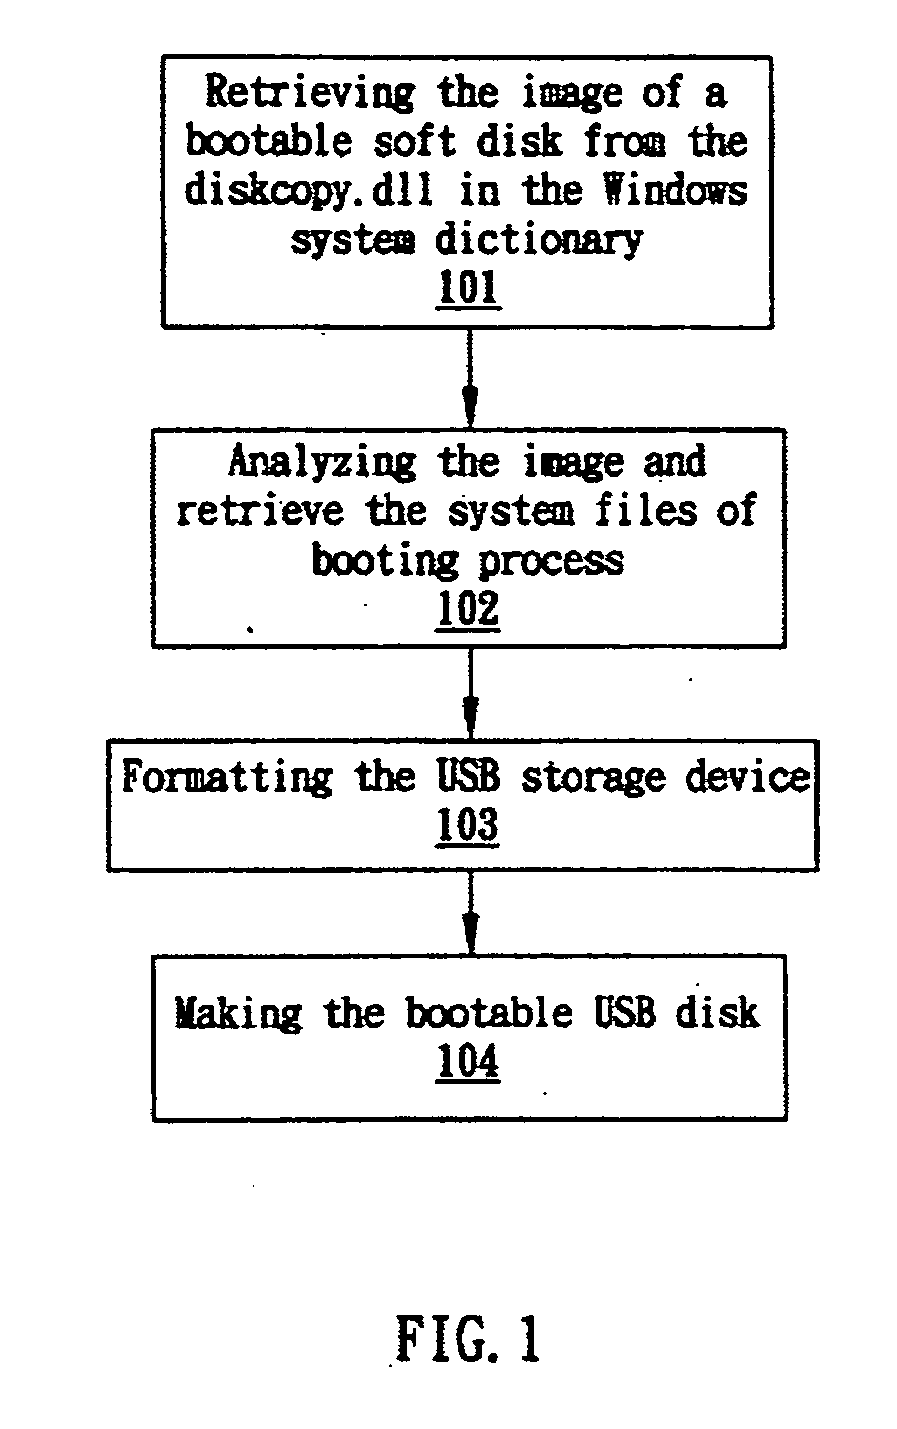 Method for making a bootable USB storage device